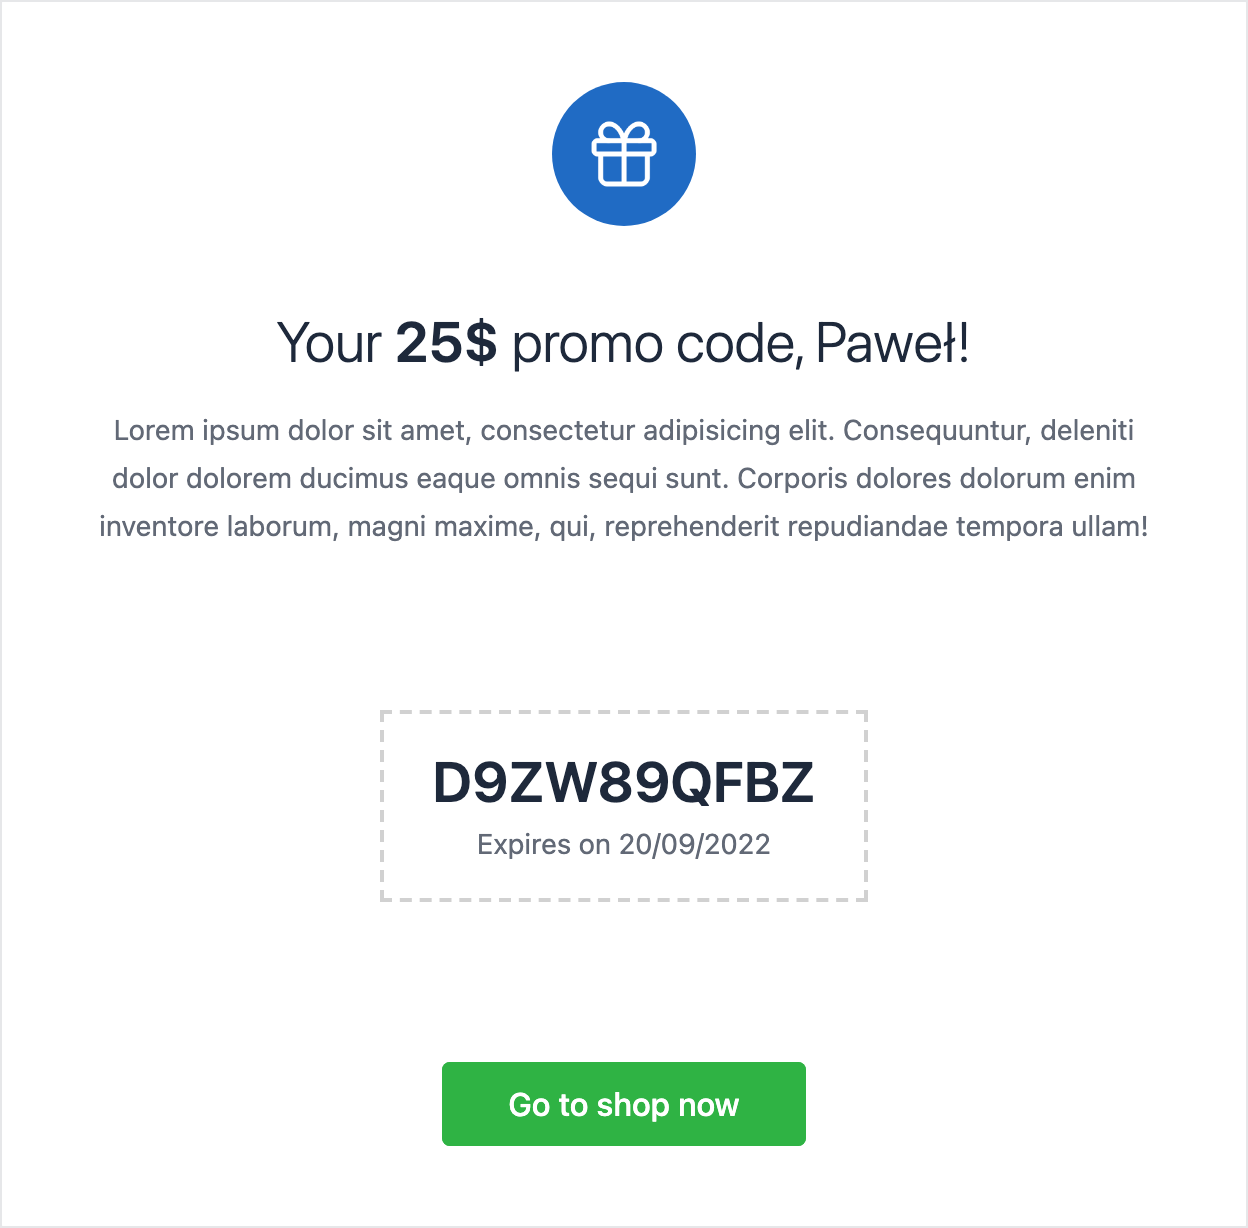 Email template associated with promo code.